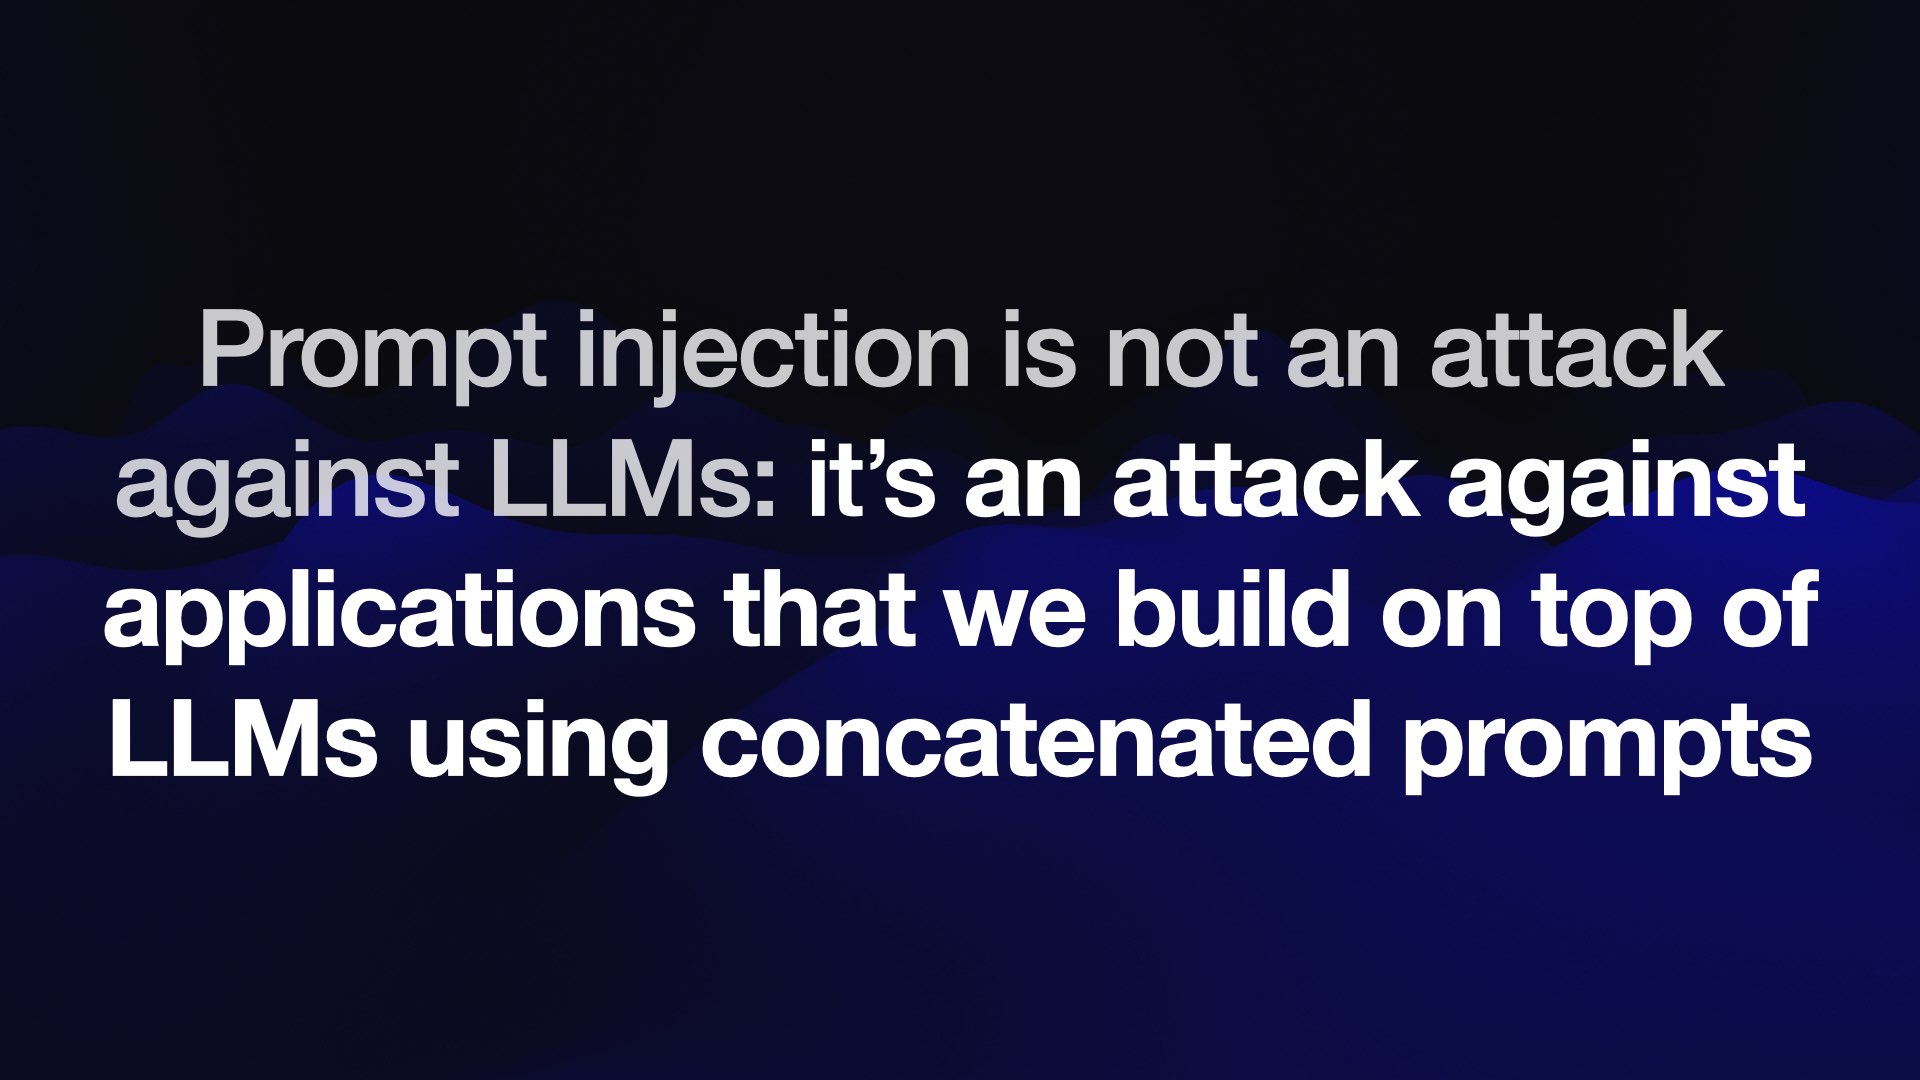 Prompt injection is not an attack against LLMs: it’s an attack against applications that we build on top of LLMs using concatenated prompts